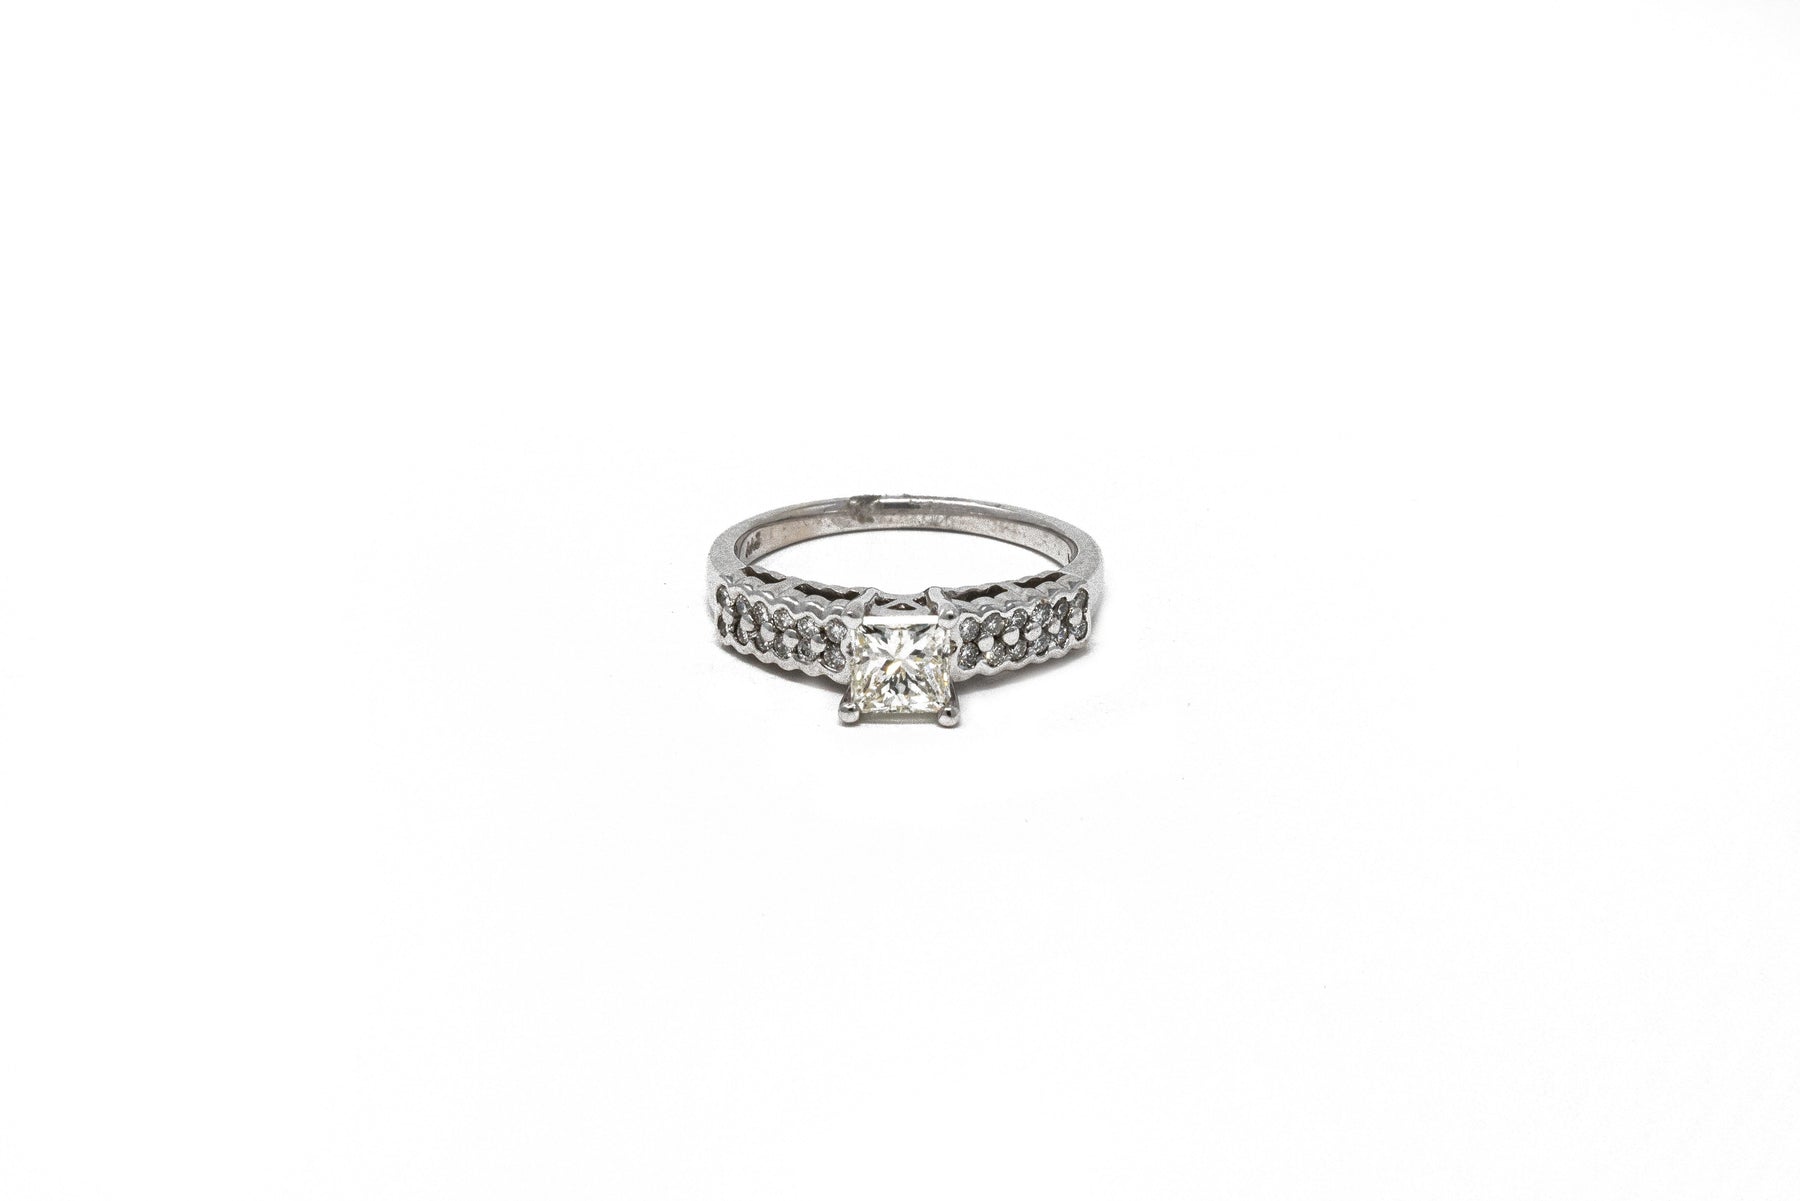 .37 point Princess Cut and .24 point Round Brilliant Cut Diamond Ring